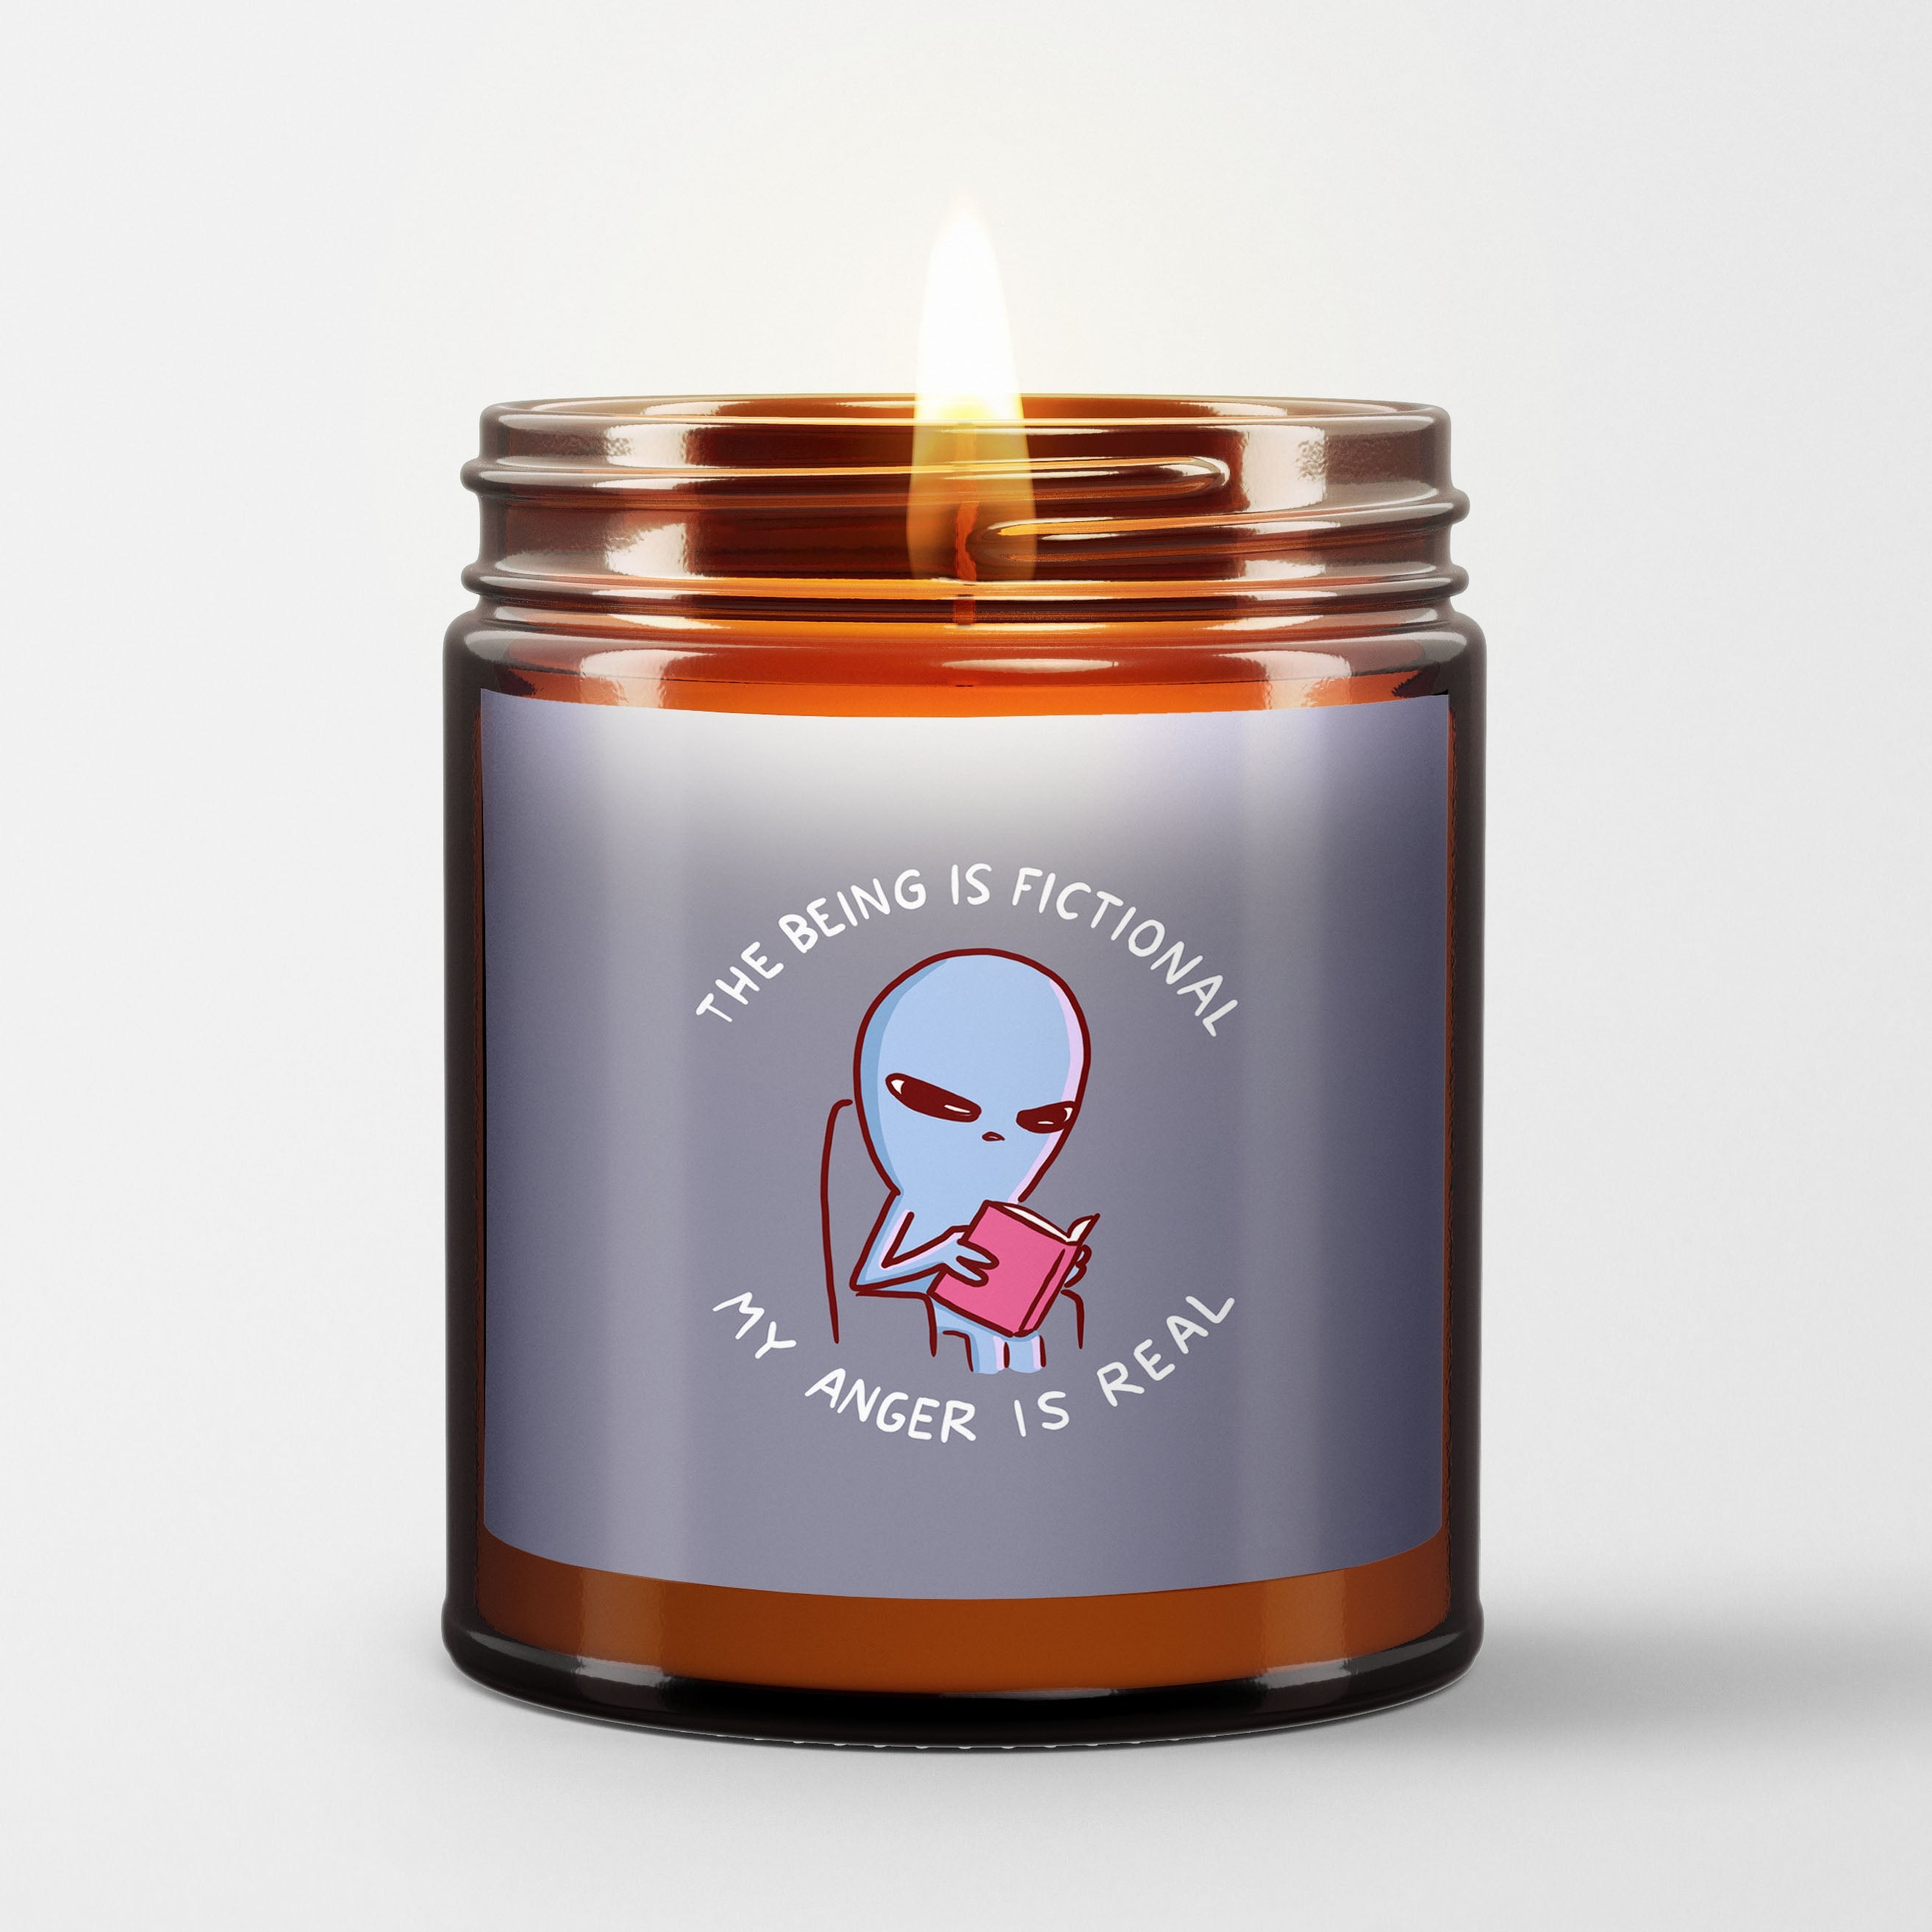 Strange Planet Scented Candle I The Being is Fictional | Nathan W Pyle